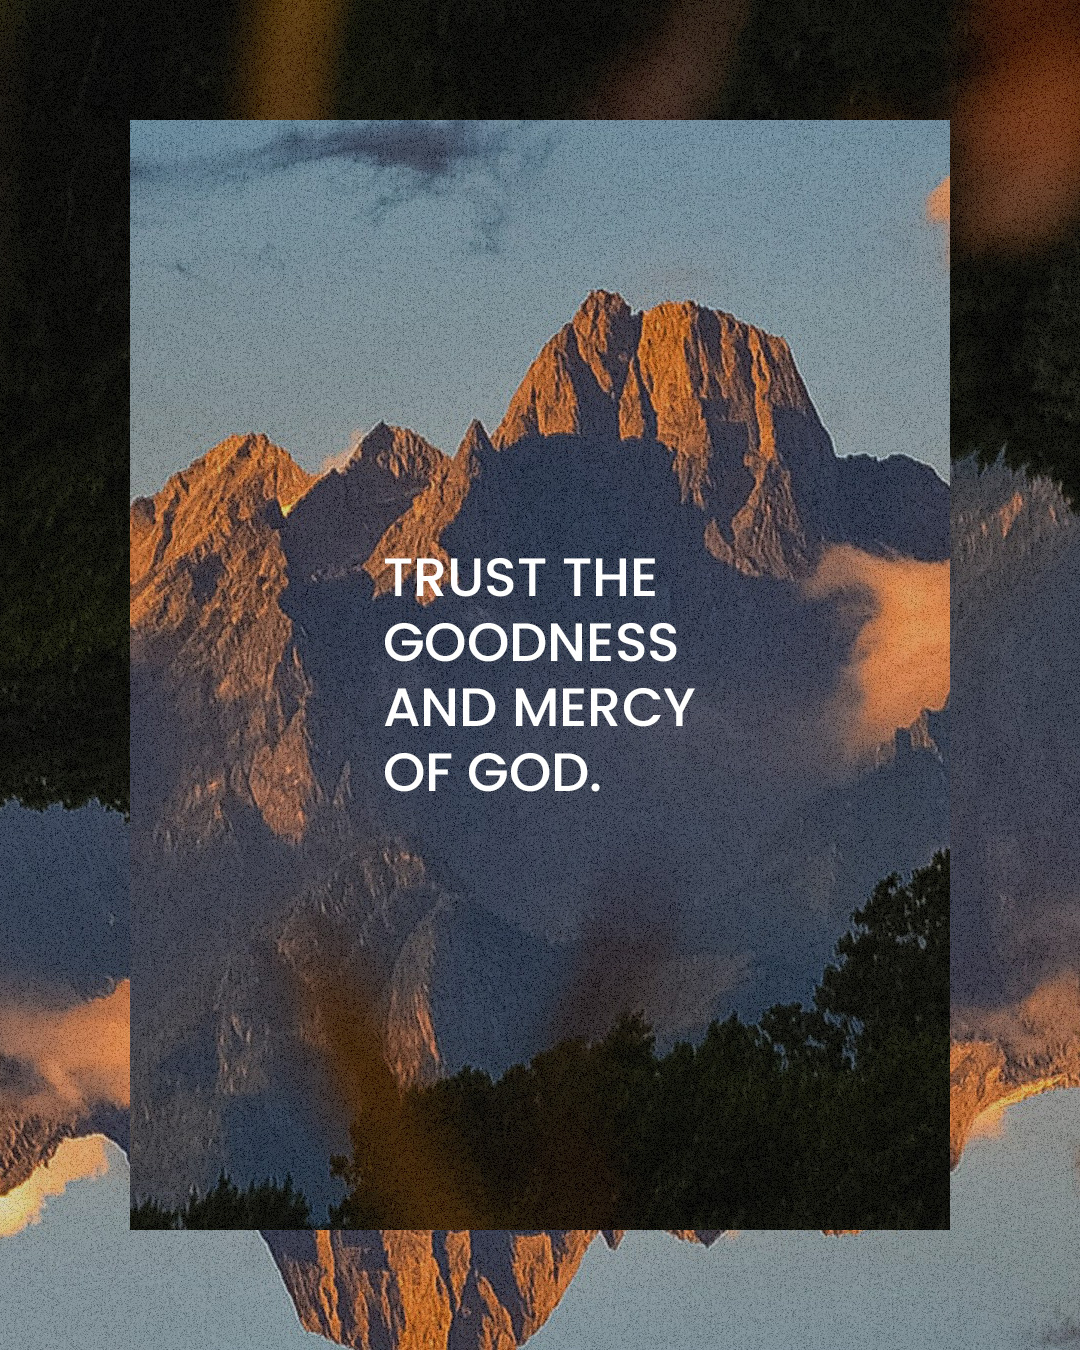 Trust the goodness and mercy of God.